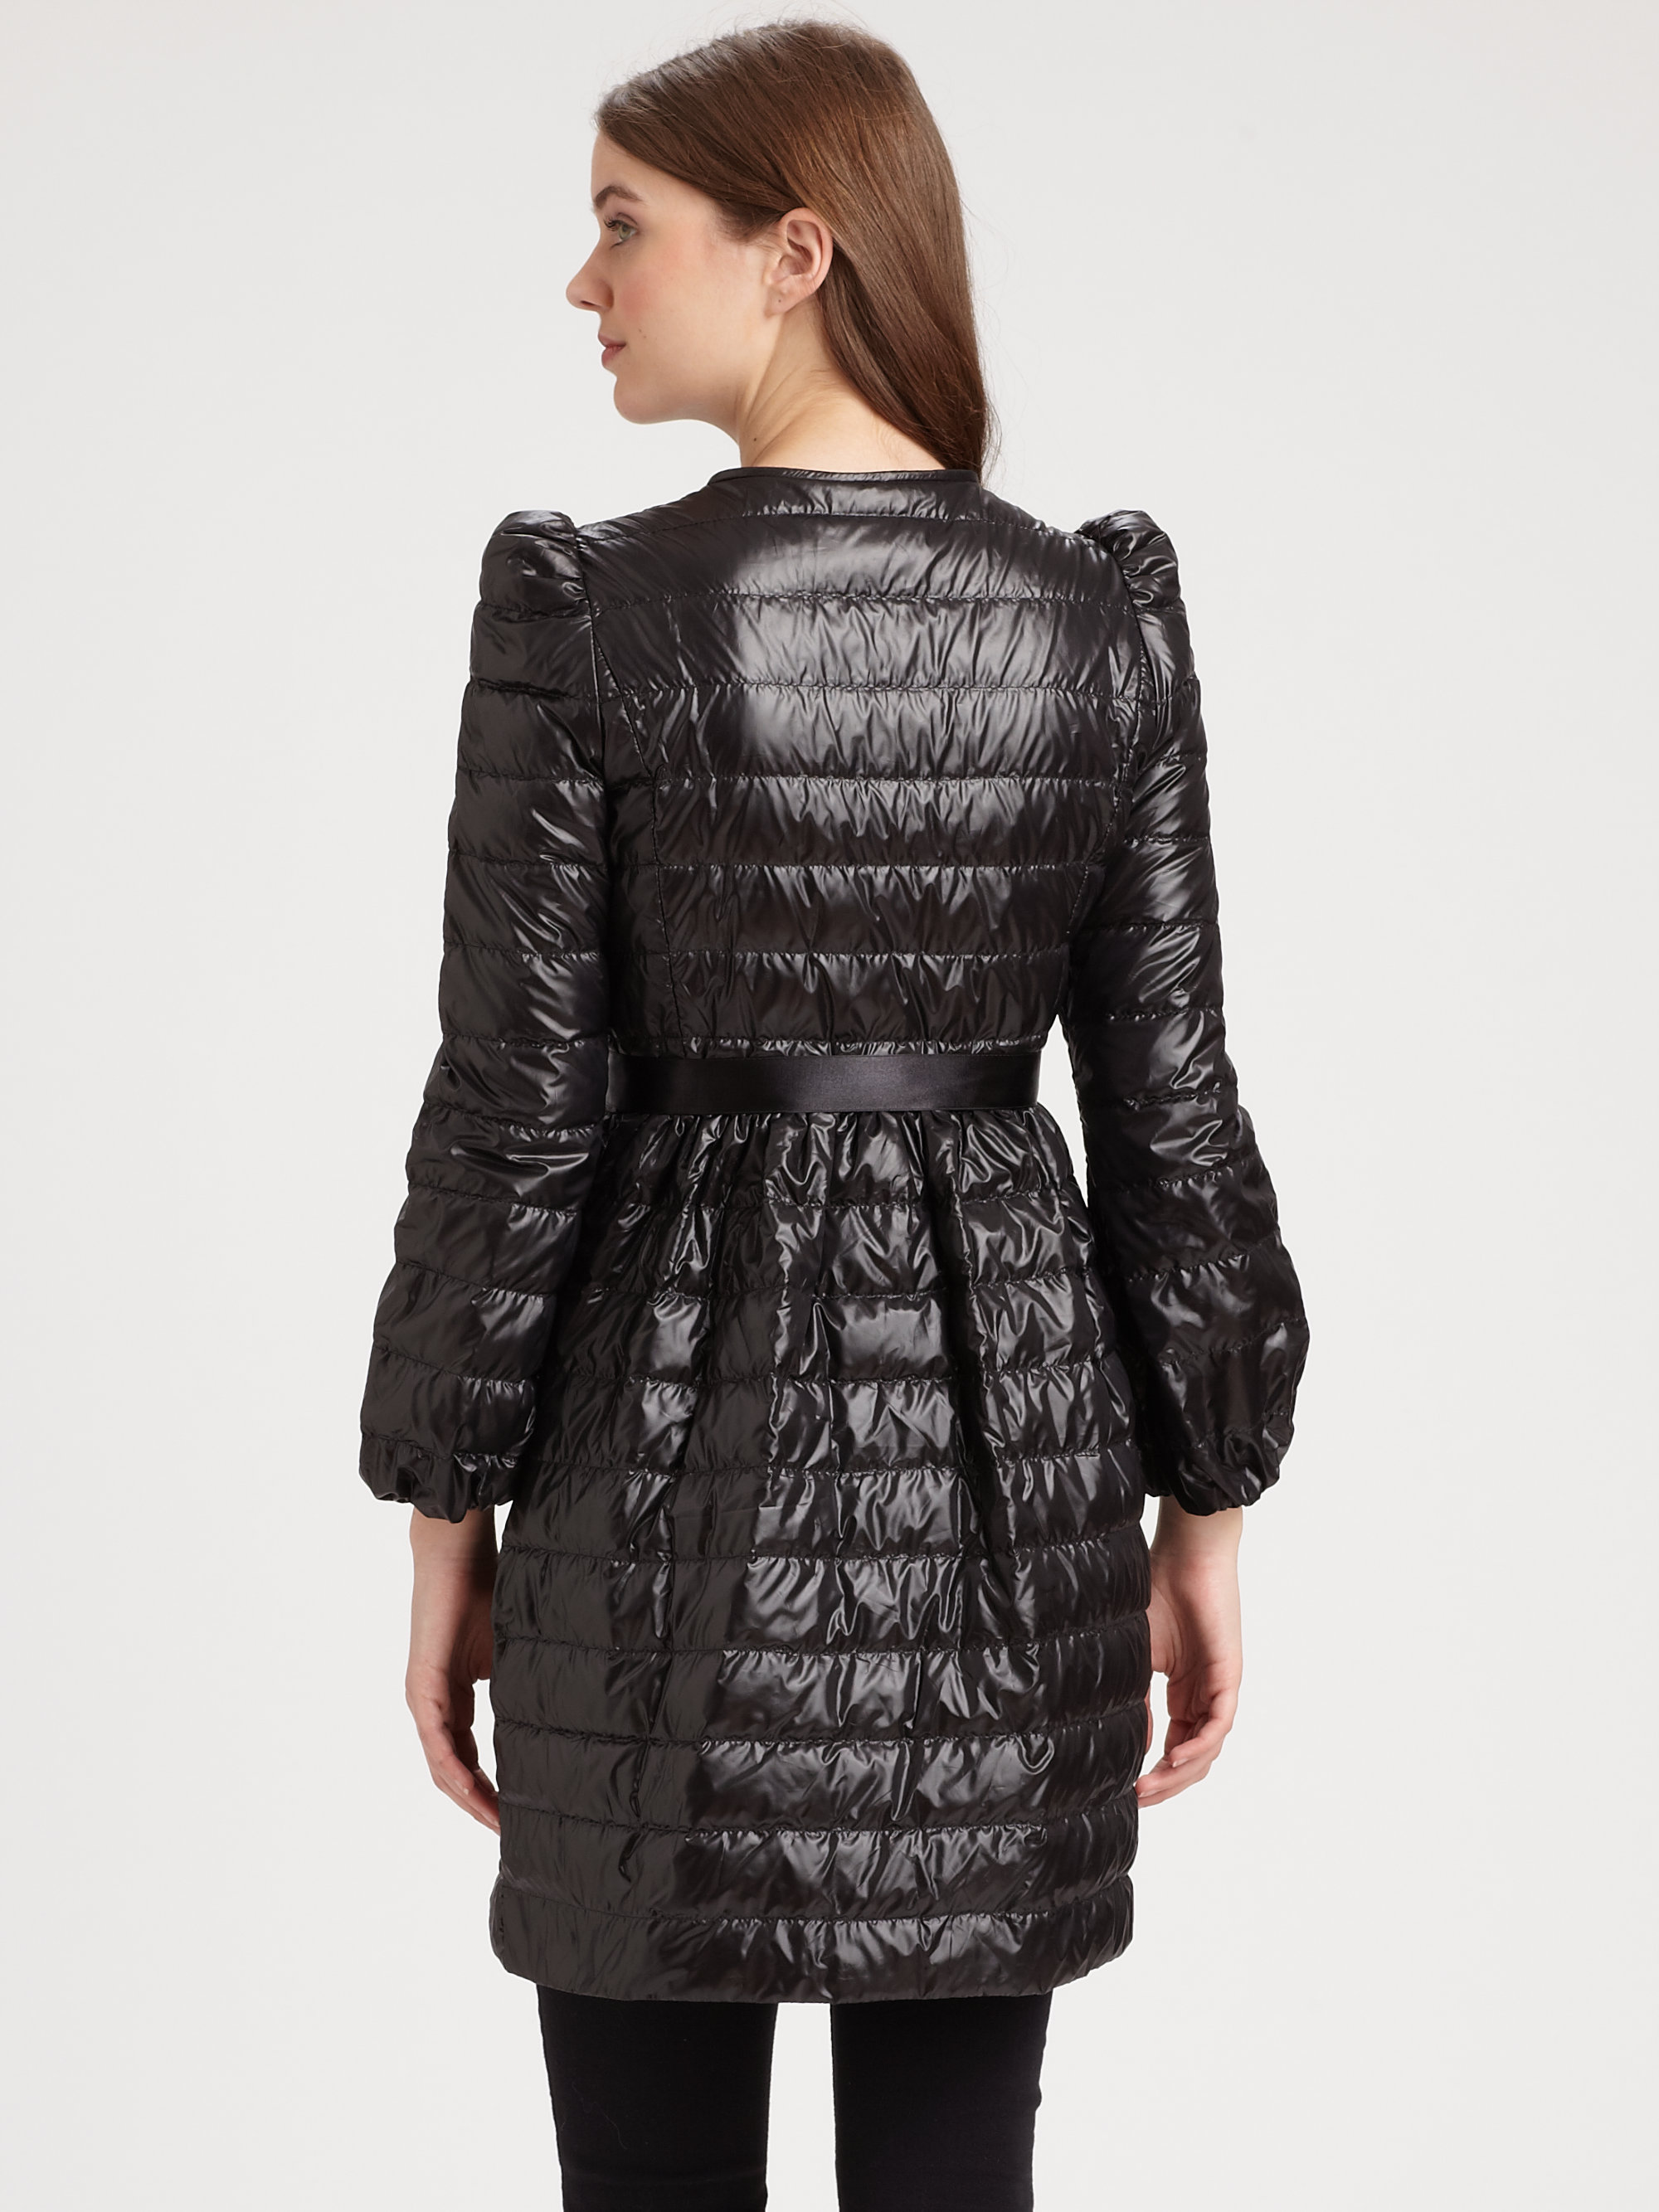 Red Valentino Puffer Jacket Cheap Sale, 53% OFF | www ...